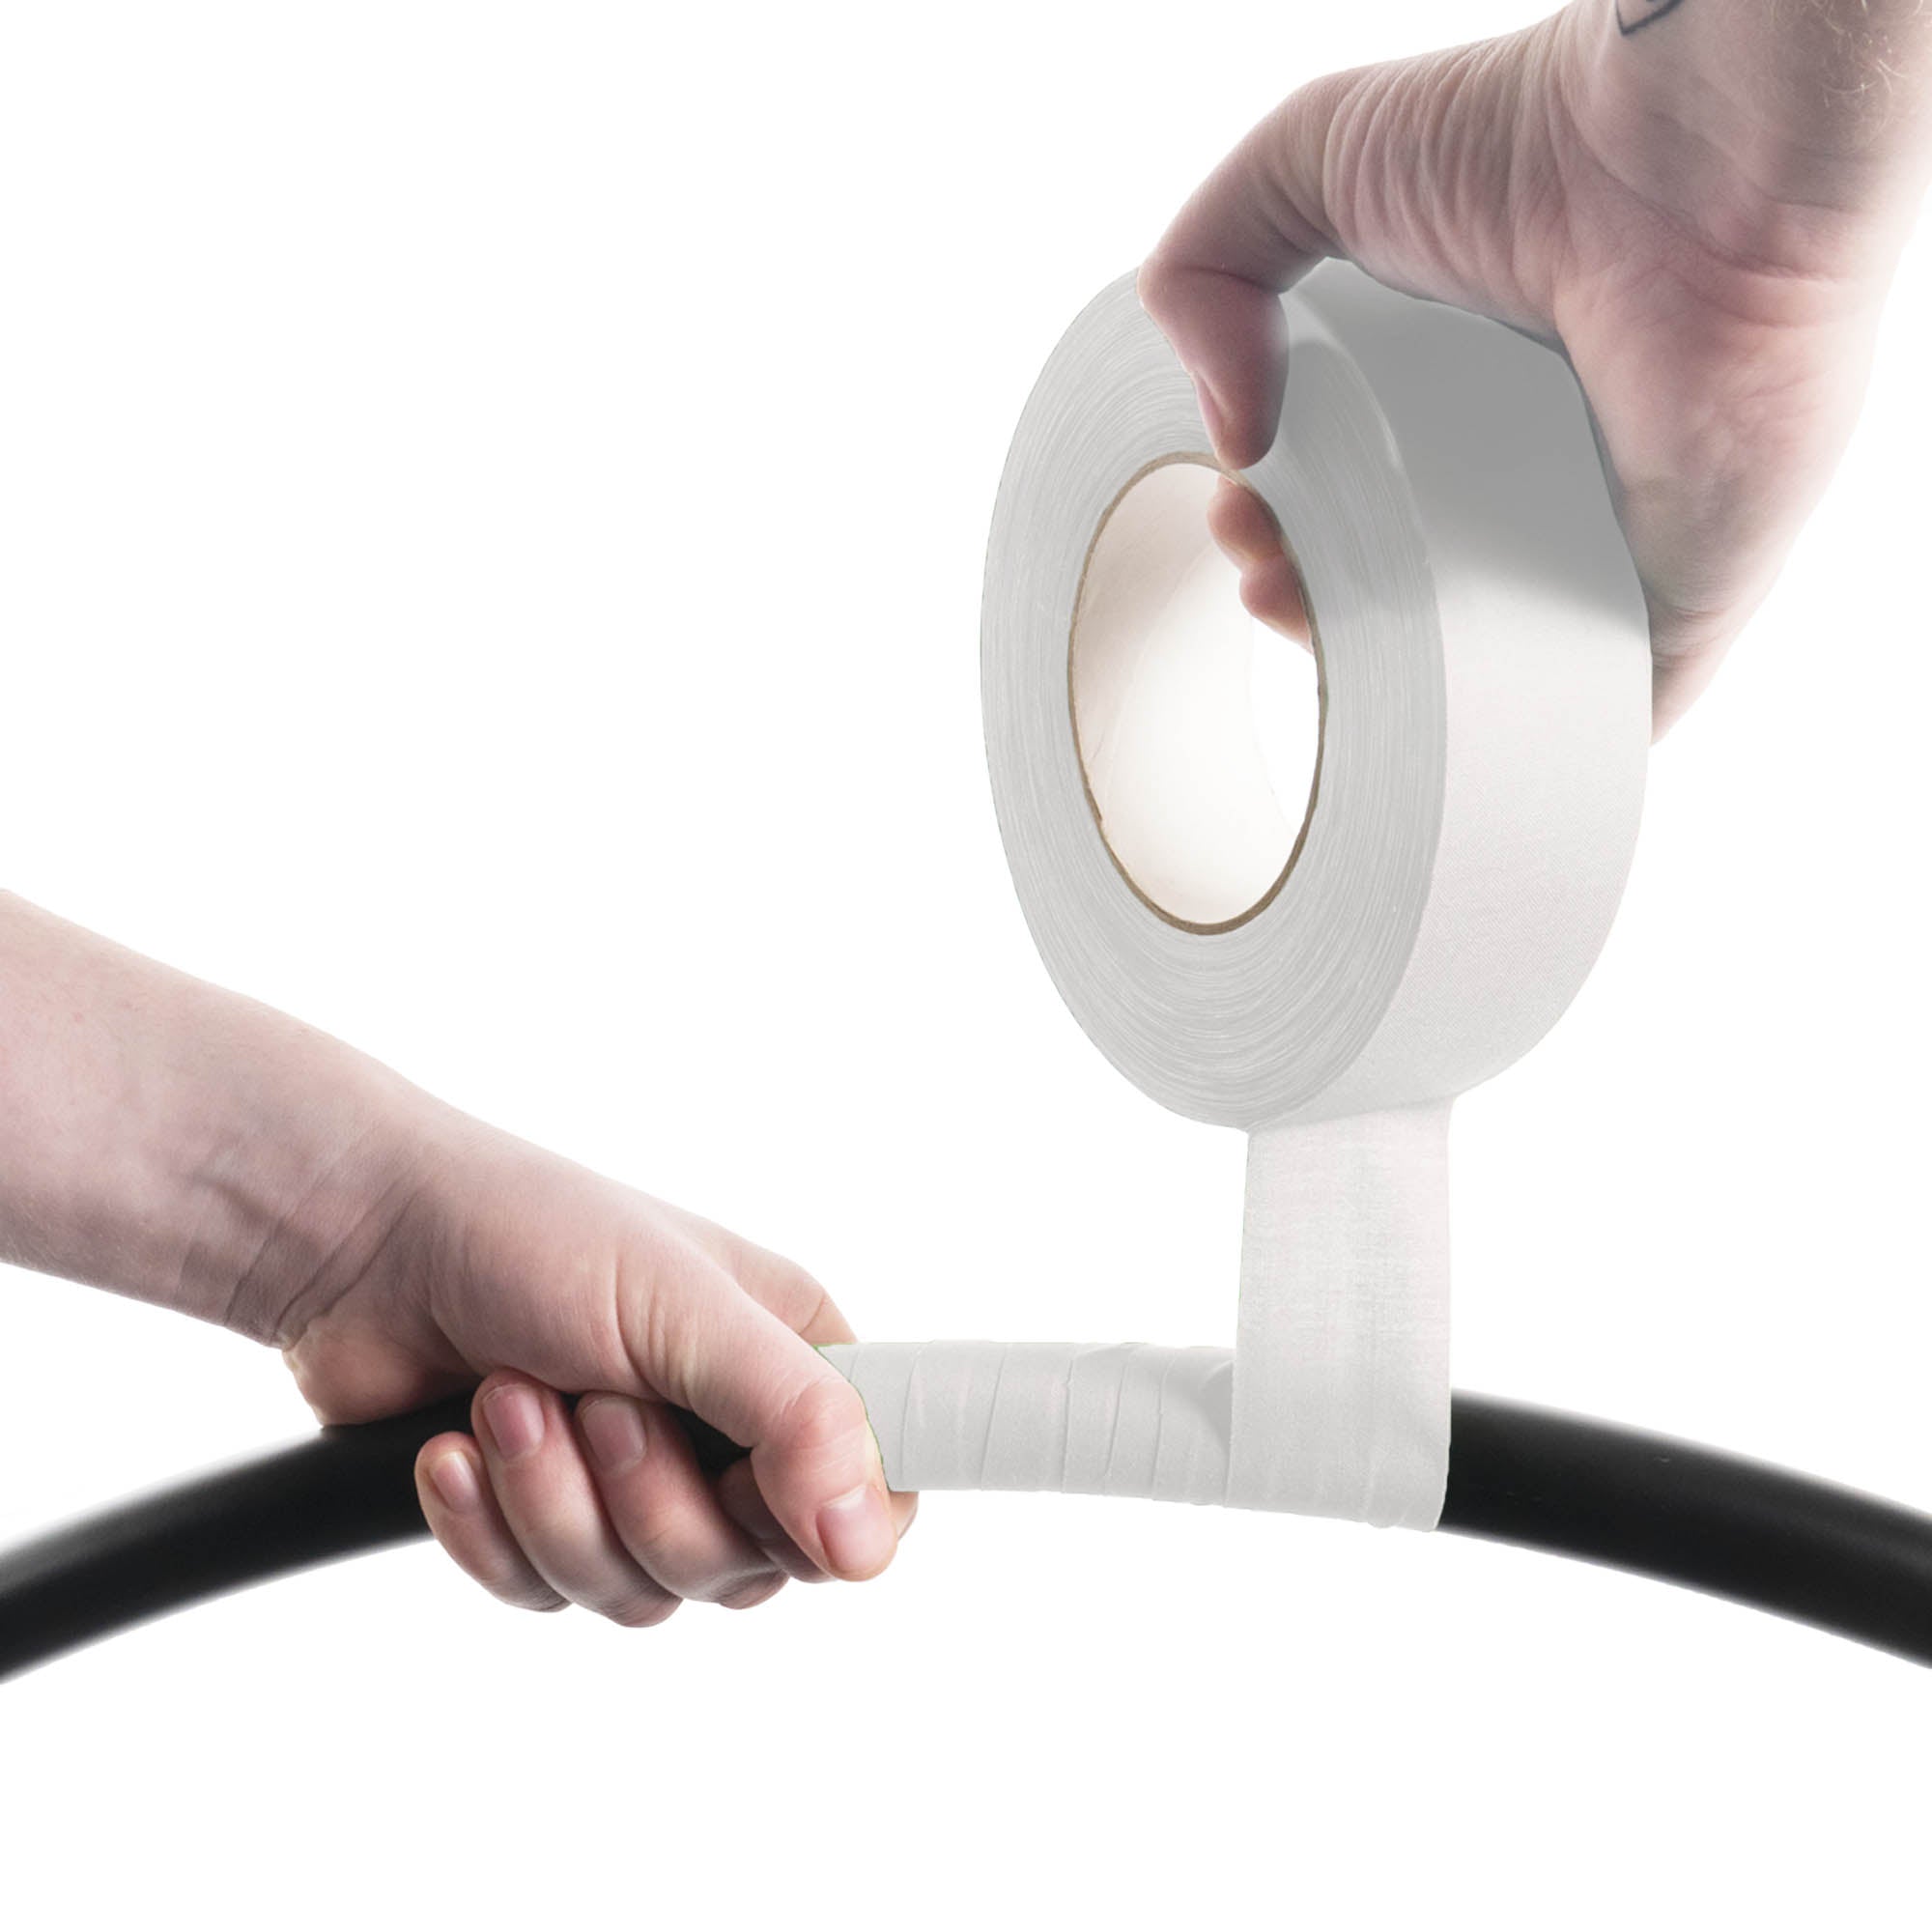 taping a hoop with white 3.8cm wide